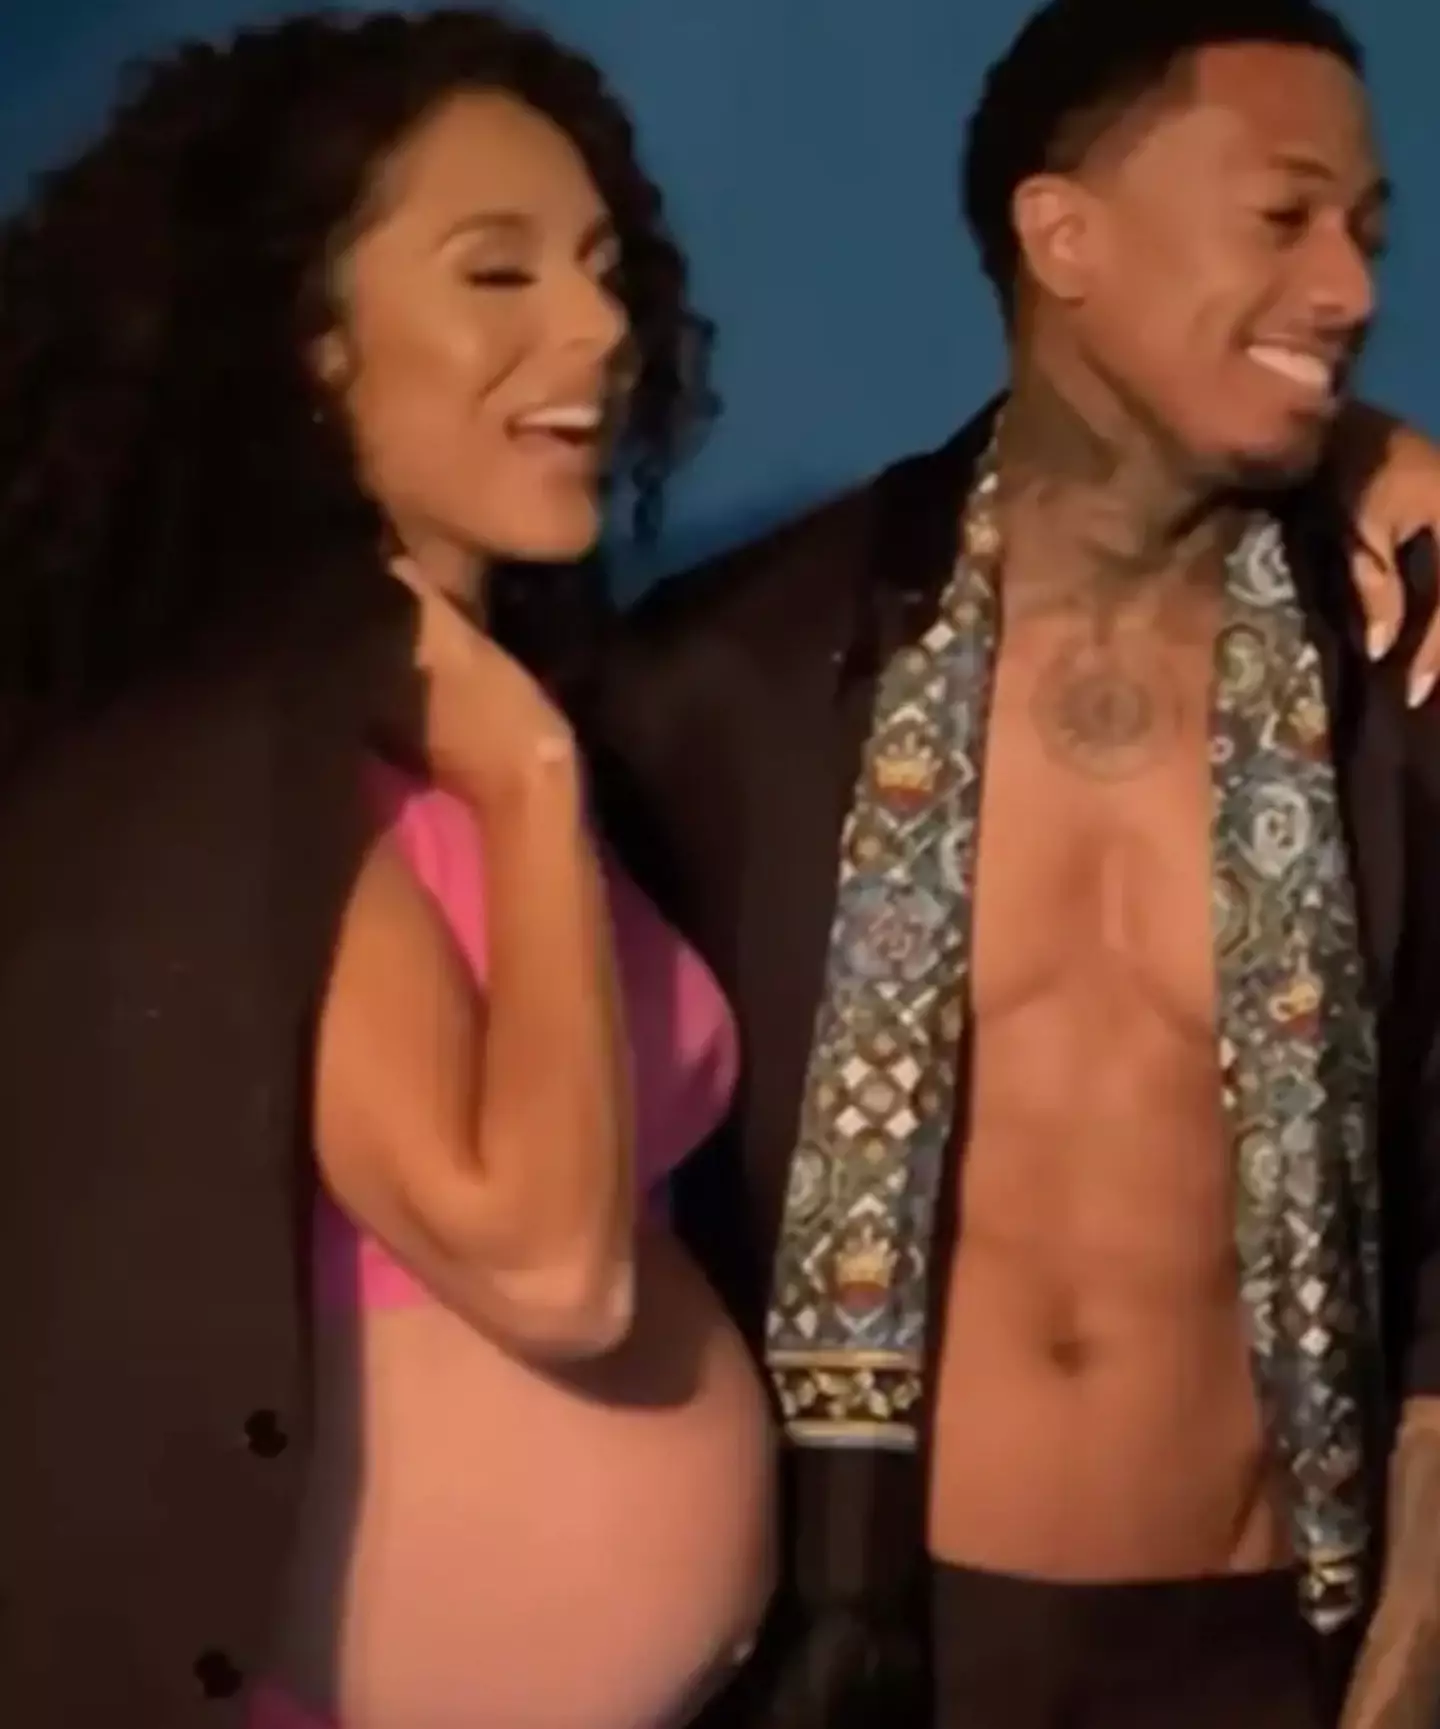 Nick Cannon and Brittany Bell recently welcomed their third child into the world together.